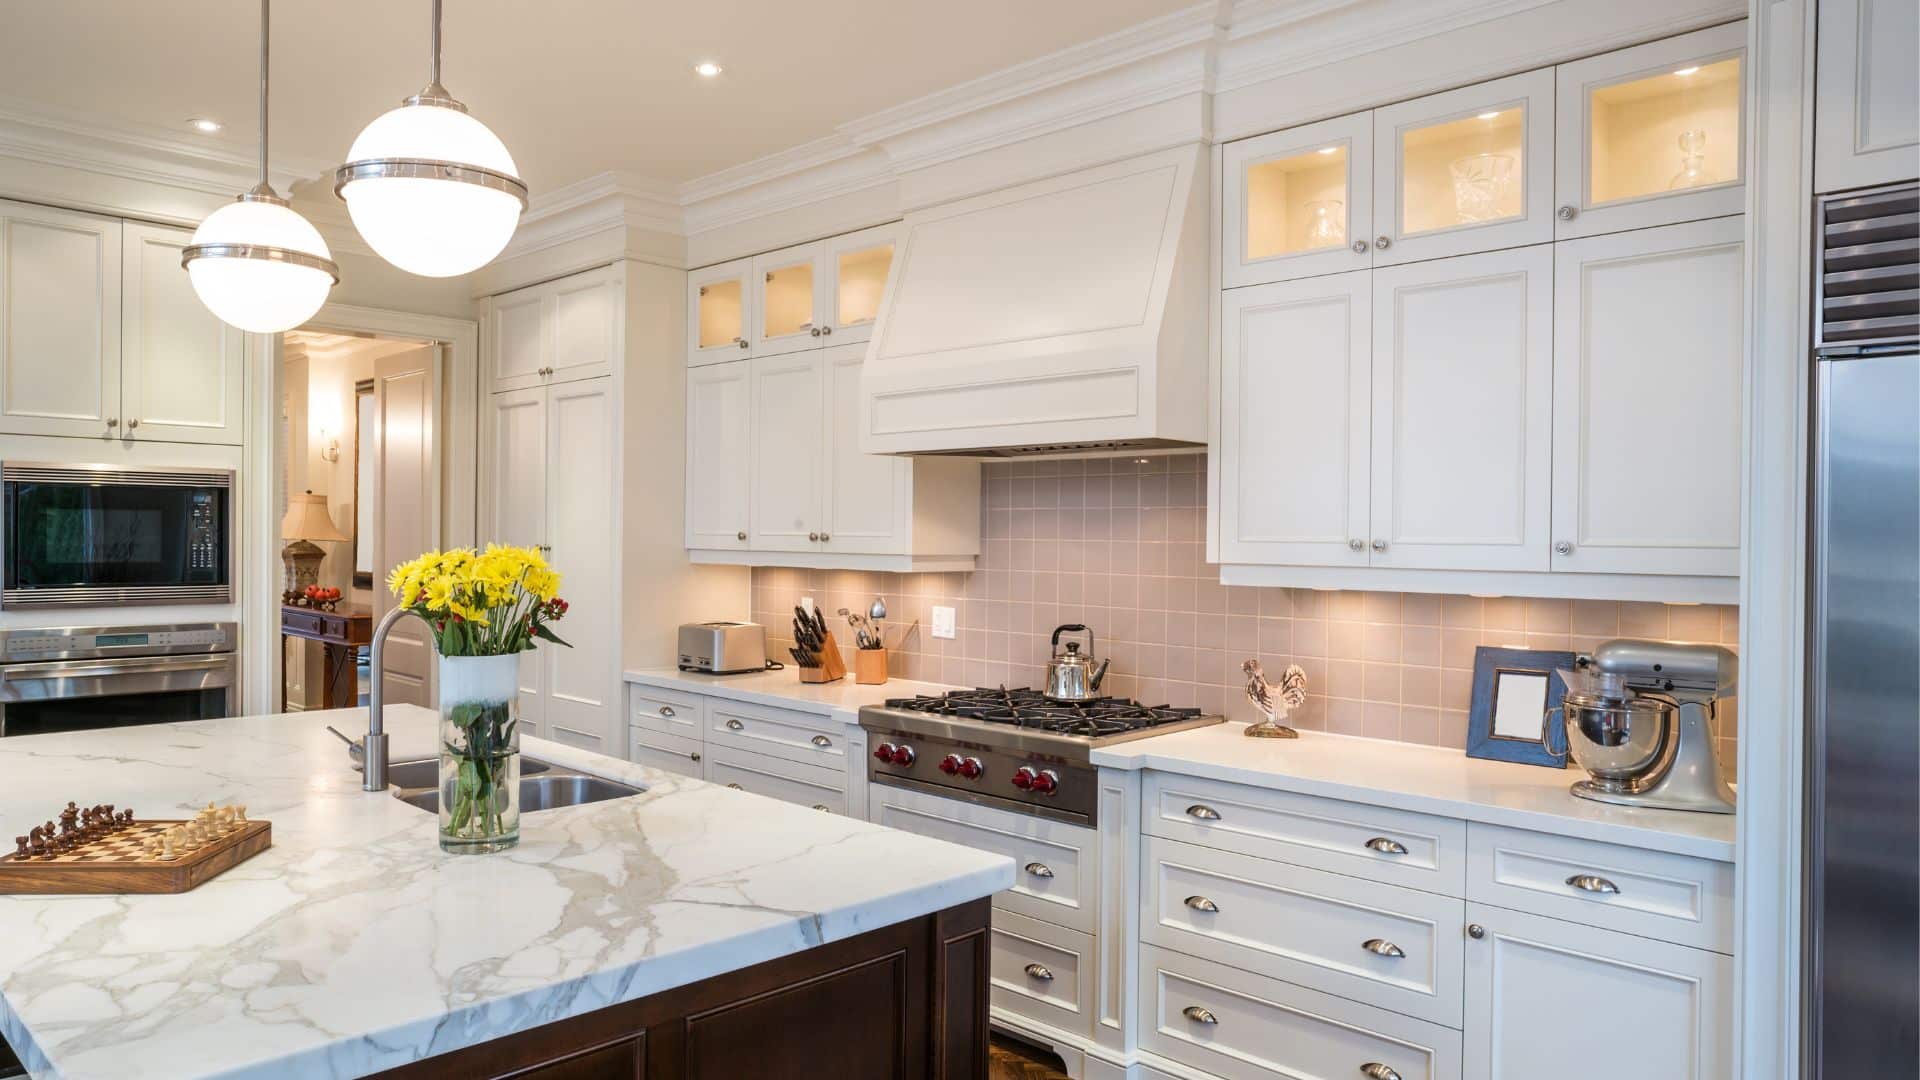 L Type kitchen with white shaker cabinets